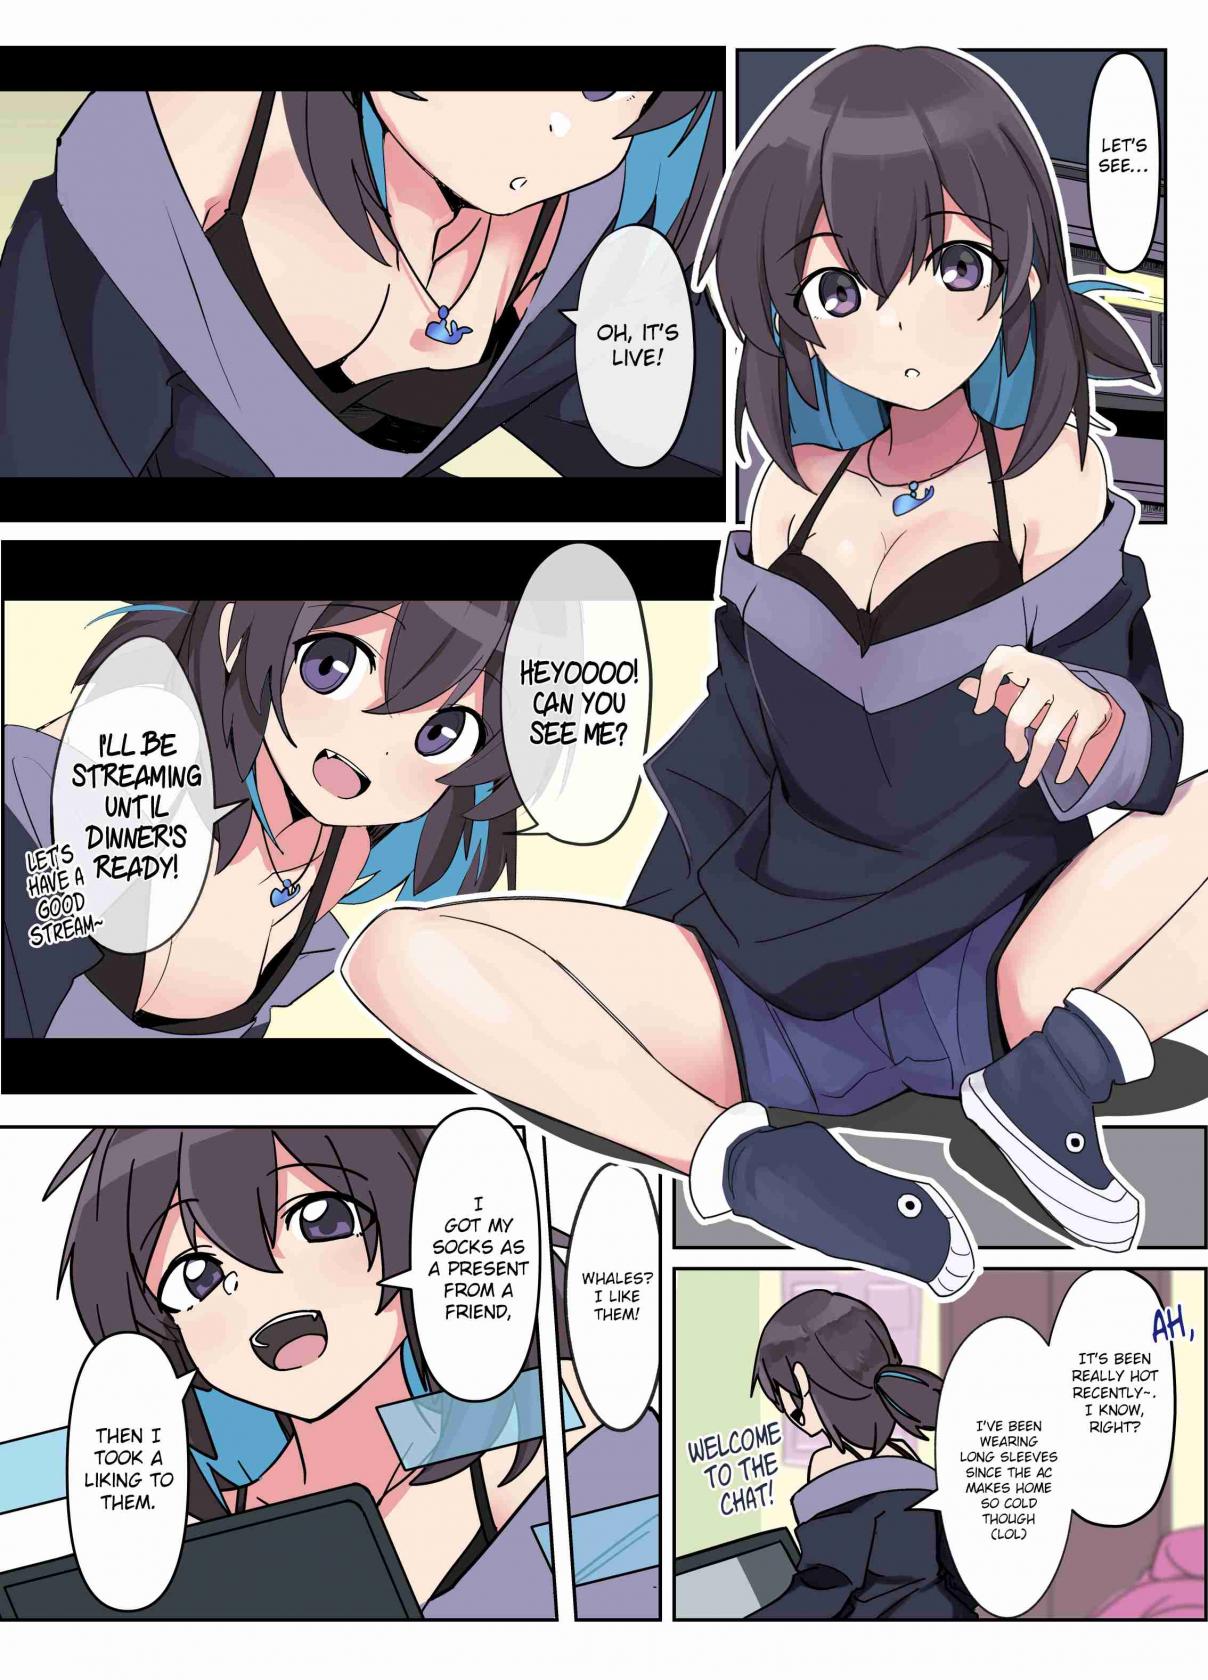 Vivid Line Ch. 5 The Live Streaming Little Sister Wants to Call Her Brother “Onii Chan”